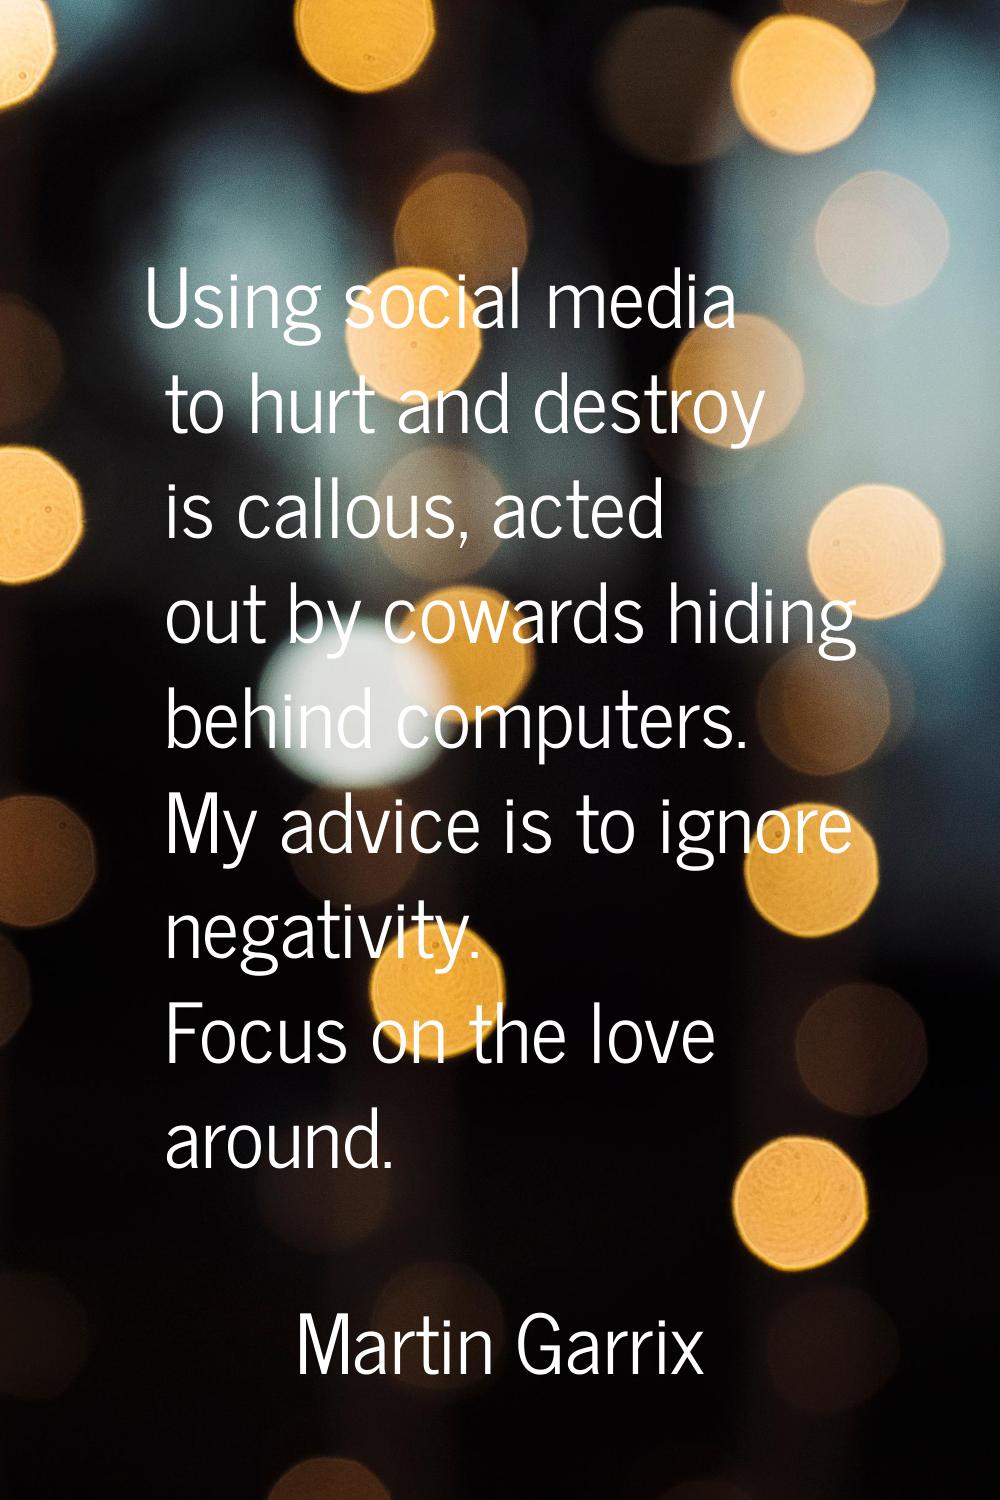 Using social media to hurt and destroy is callous, acted out by cowards hiding behind computers. My